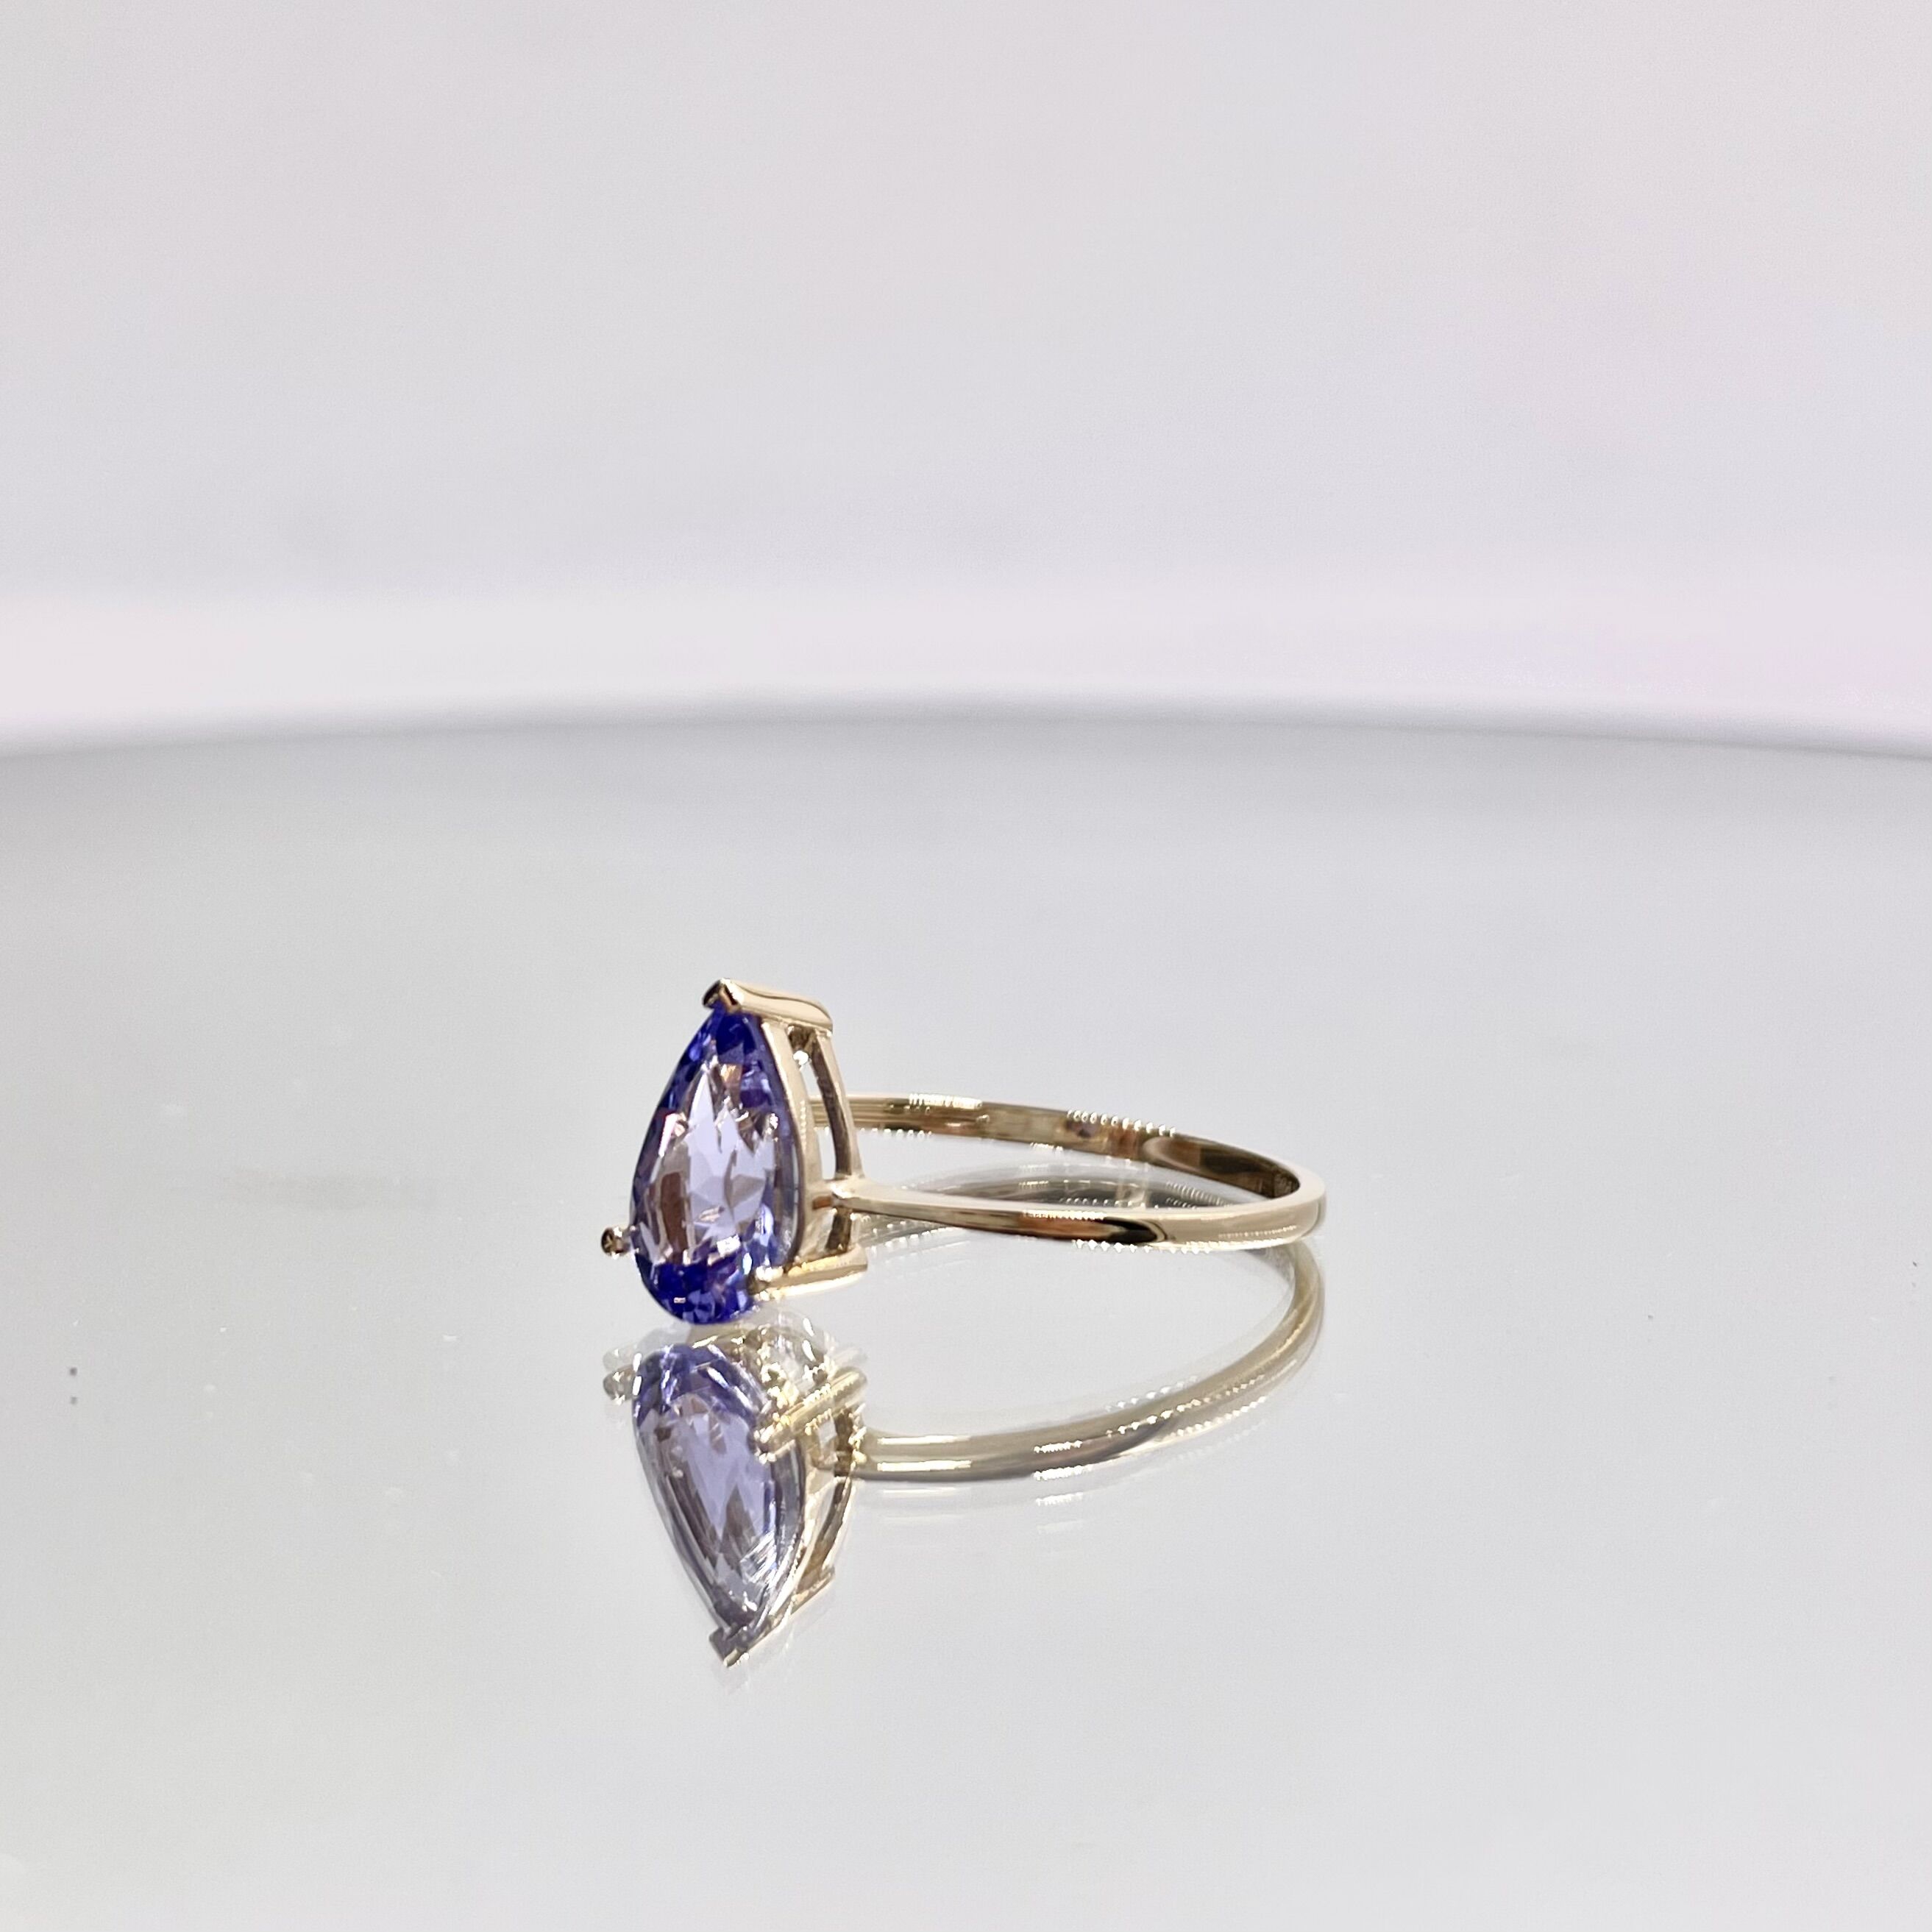 Real 14k Yellow Gold Ring with 1.5ct 6.0x9.0mm Classic Design Pear Cut Natural Gem AA Tanzanite-2